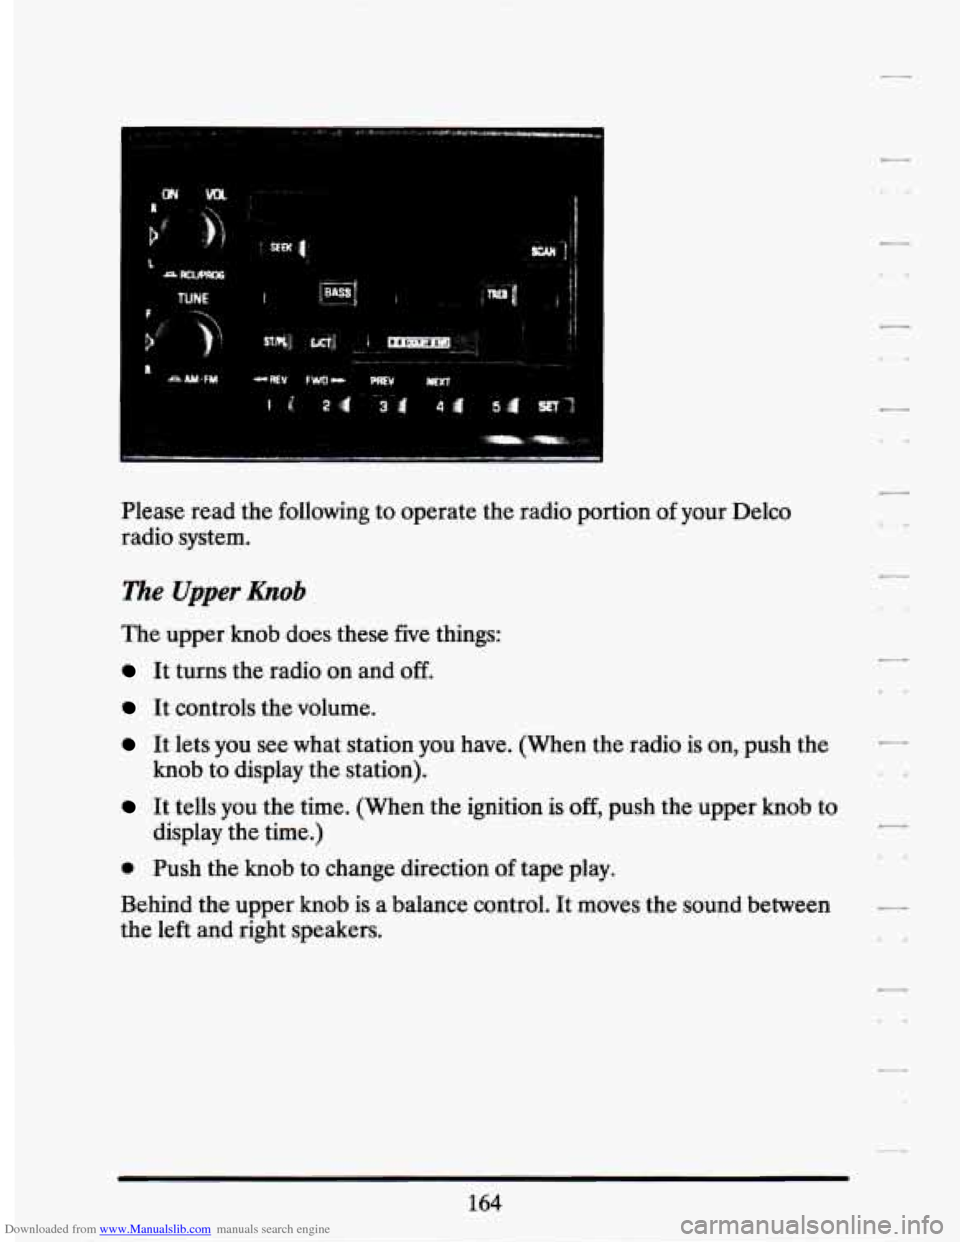 CADILLAC SEVILLE 1994 4.G Owners Manual Downloaded from www.Manualslib.com manuals search engine 1 =waJPim 
TUNE 
Please read the following  to  operate  the  radio portion of your  Delco 
radio  system. 
The Upper &ob 
The  upper  knob doe